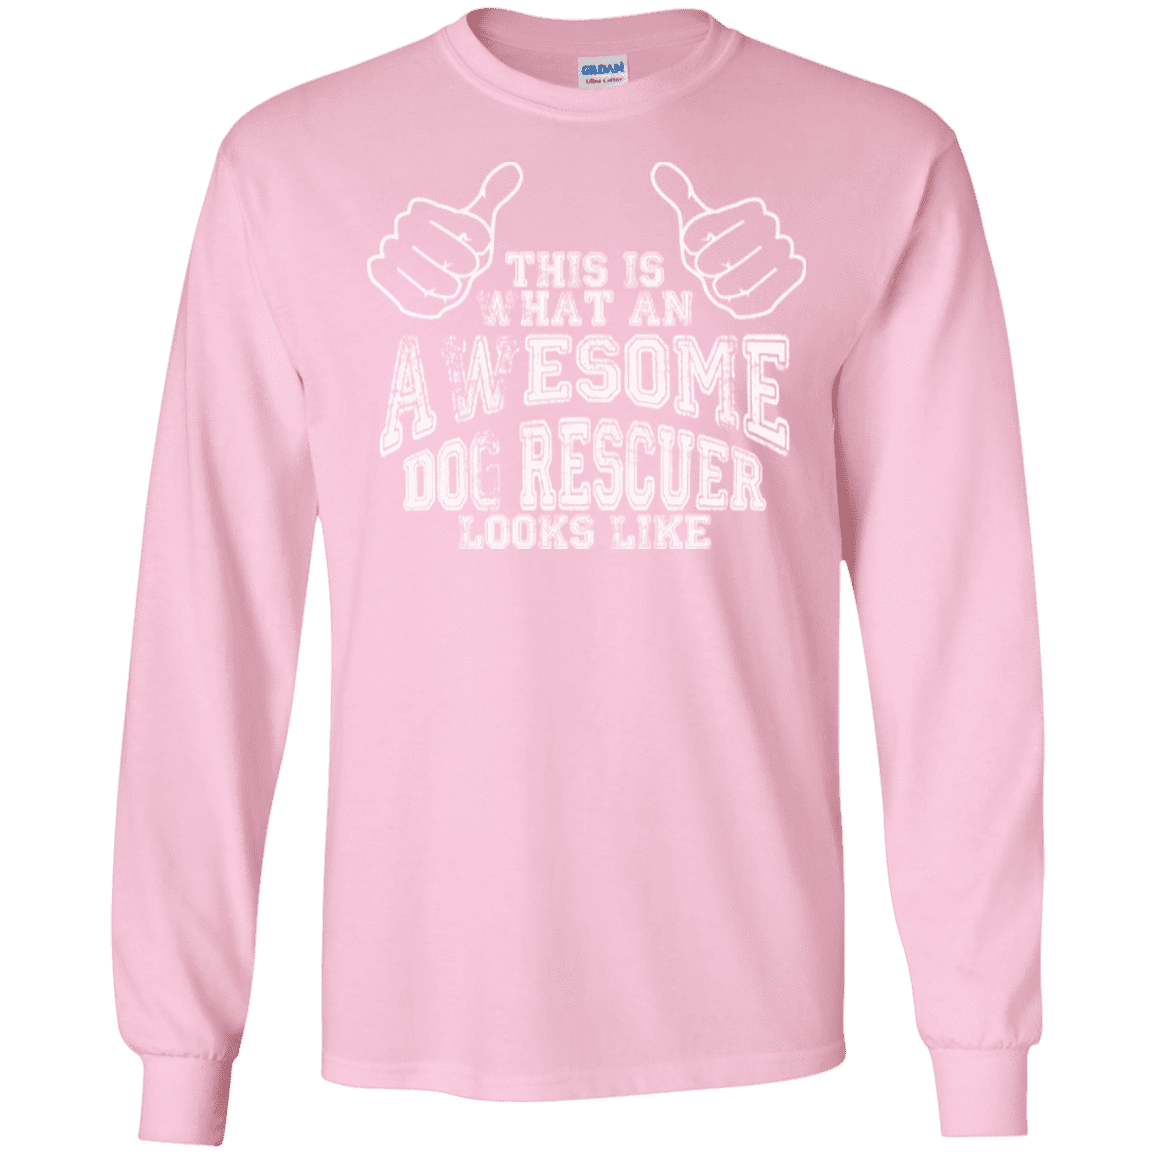 Awesome Dog Rescuer - Long Sleeve T Shirt.